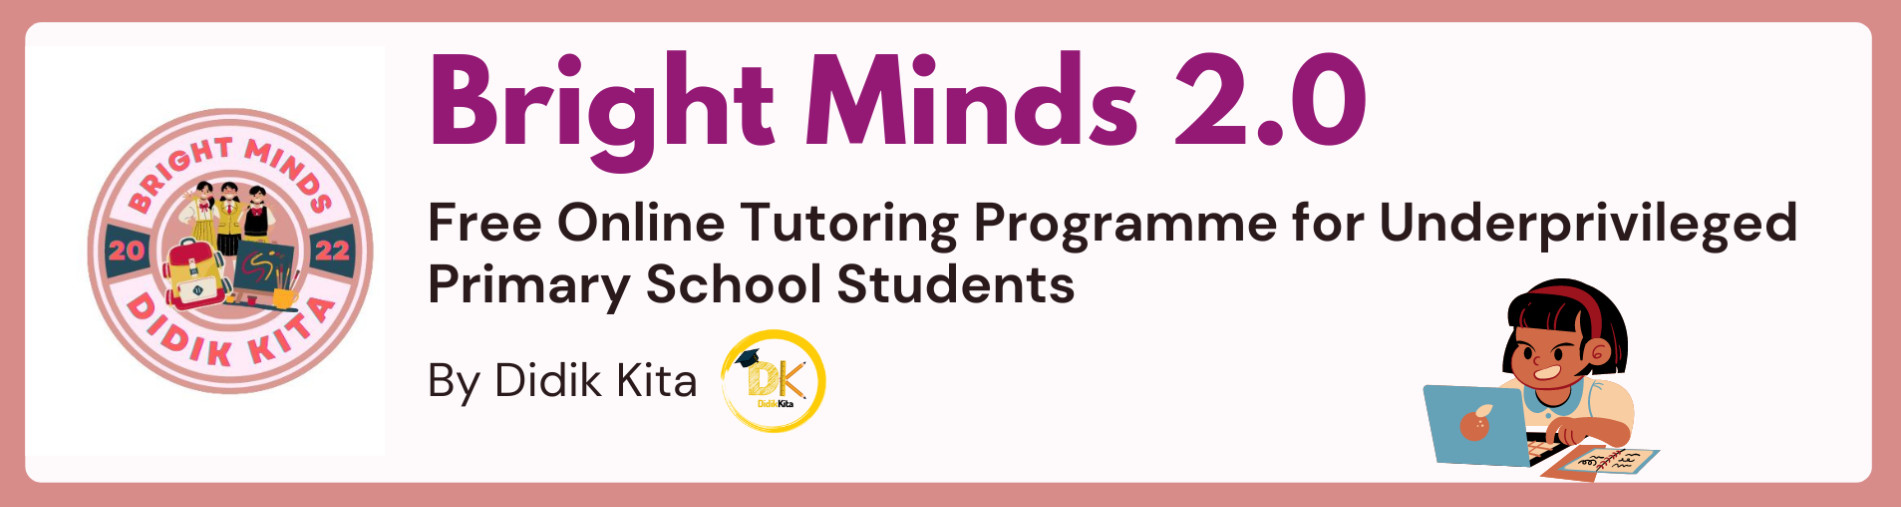 Bright Minds 2.0 Free Online Tutoring Programme for Underprivileged Students